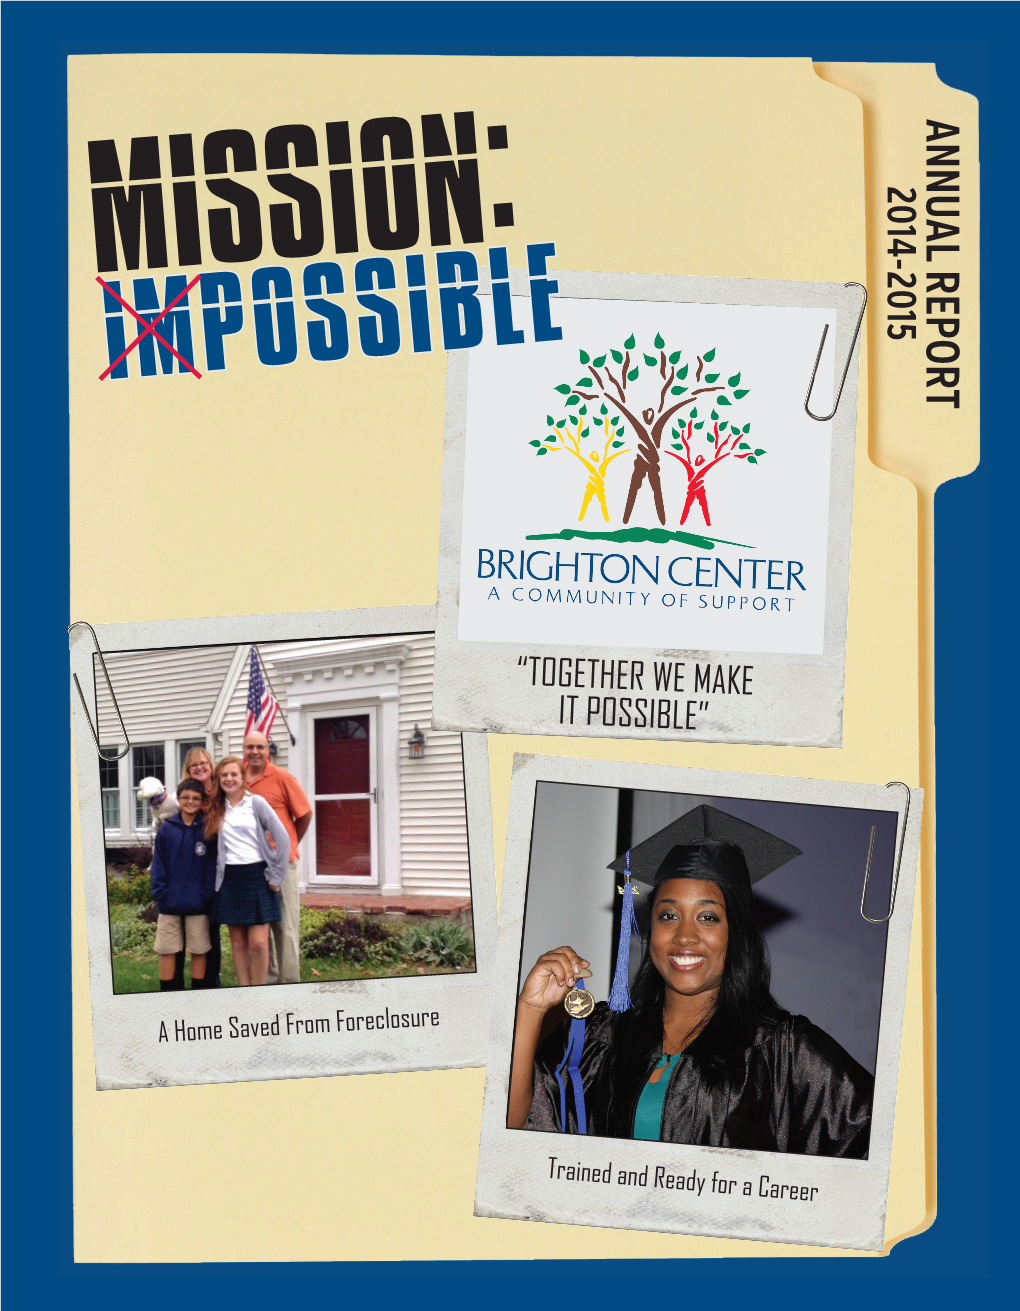 2014-2015 Annual Report: Mission Possible